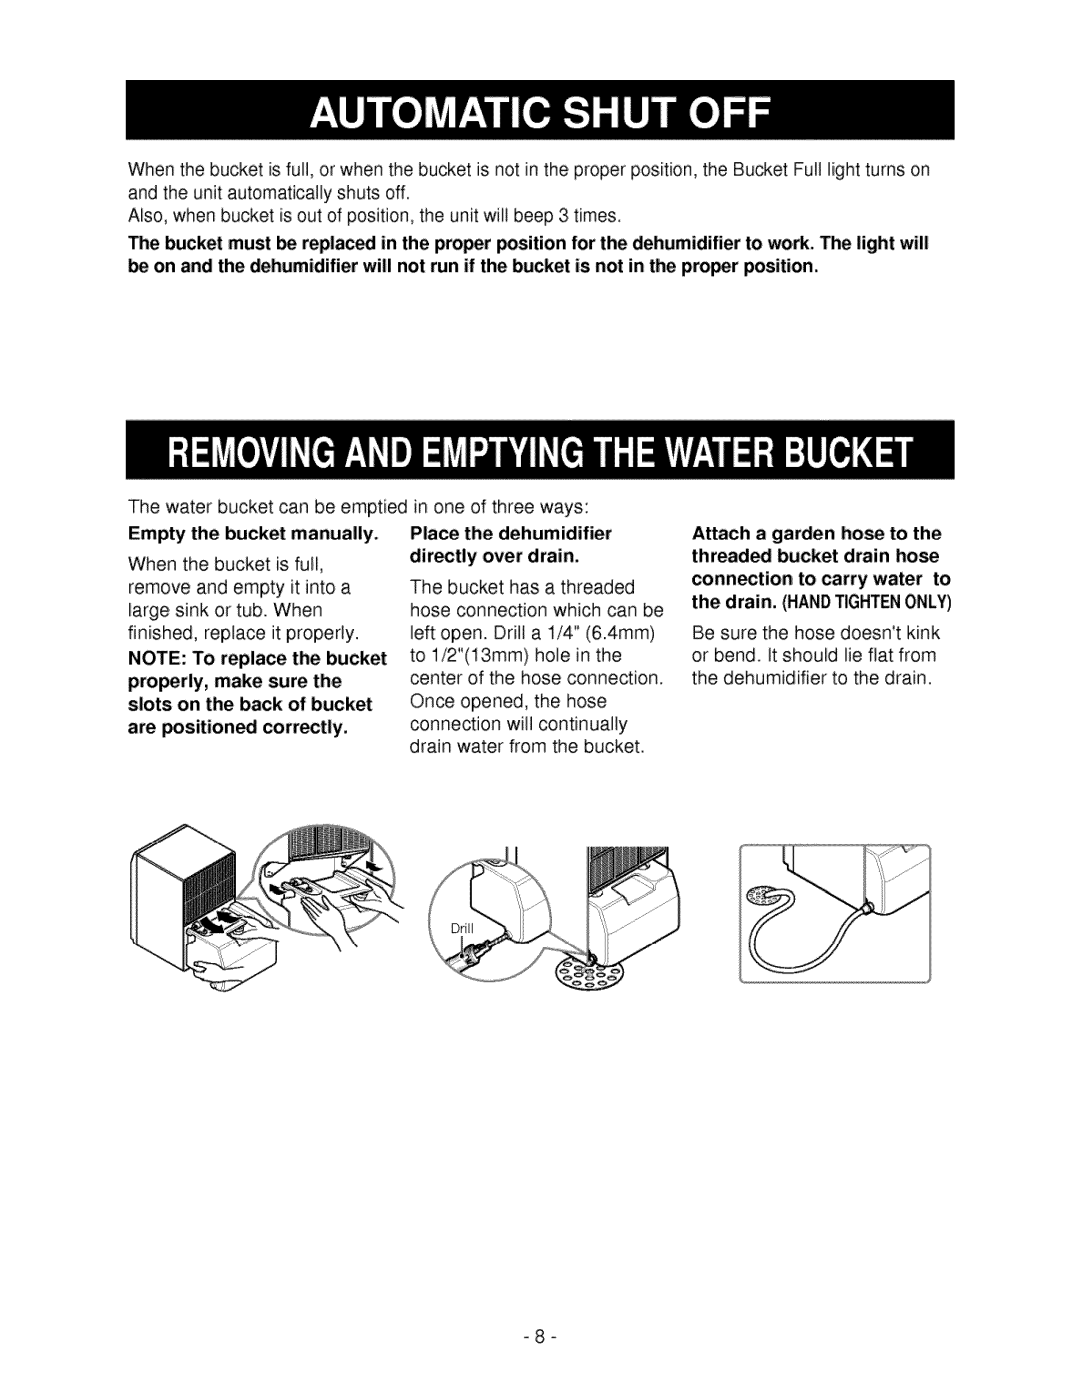 Kenmore 580.5245 owner manual Empty the bucket manually, properly, make sure the, are positioned correctly 